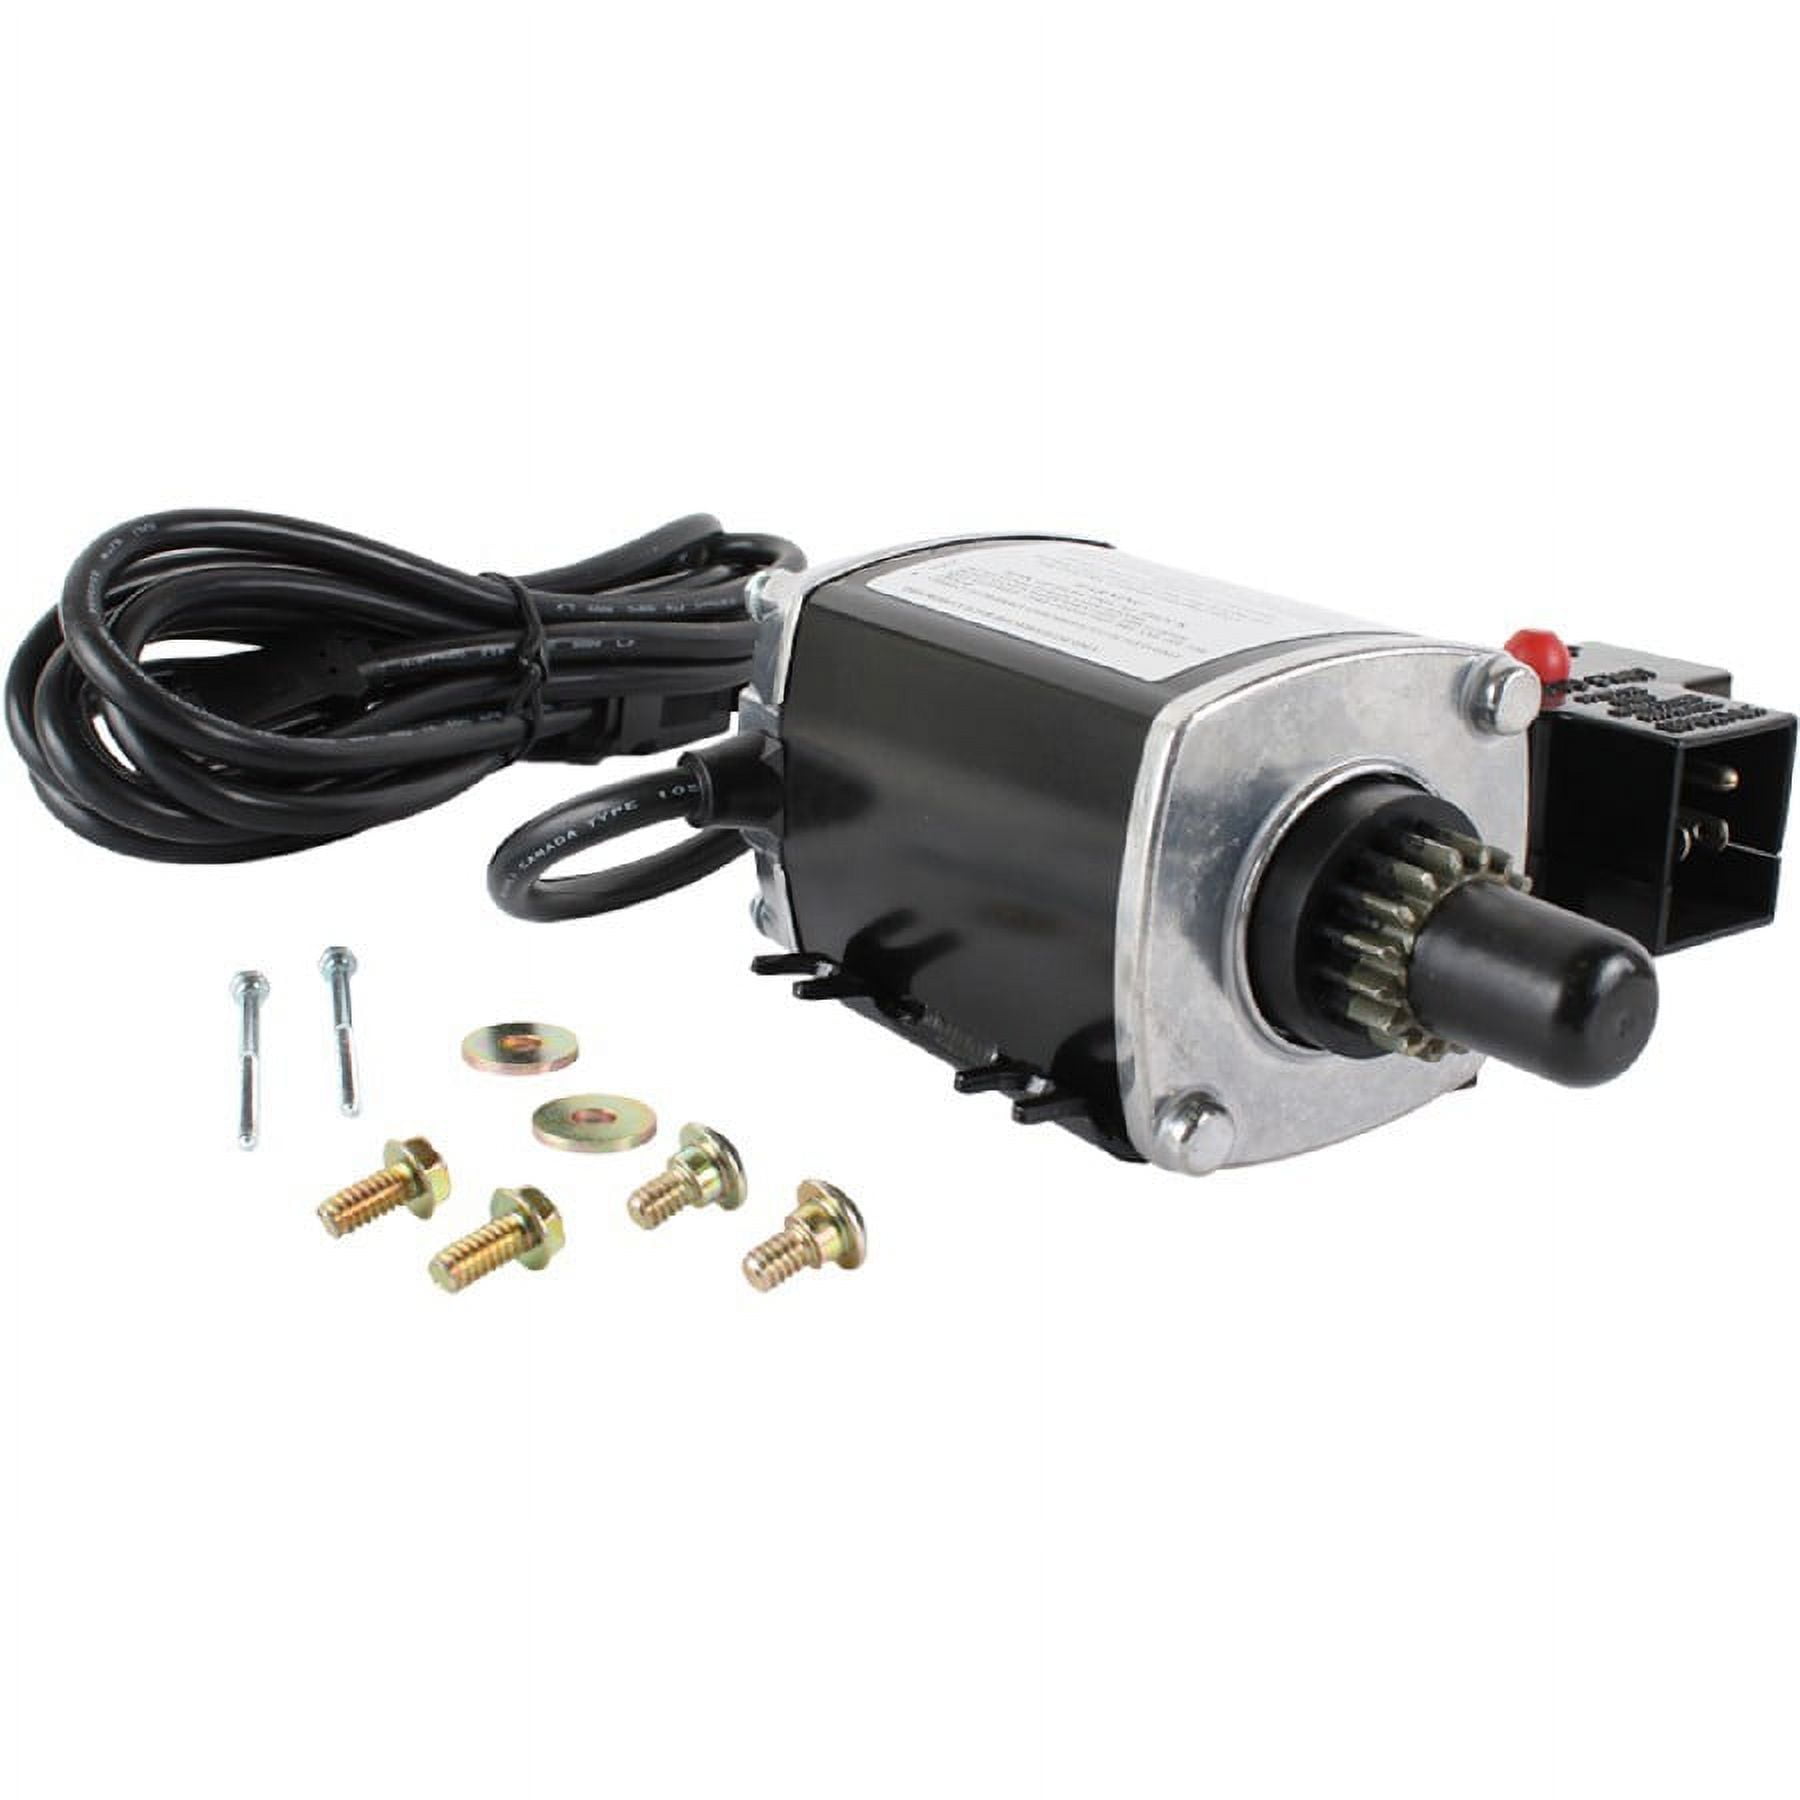 DB Electrical STC0016 New Starter for Tecumseh 33329 33329C 33329D 33329E  33329F 37000 For Snowblower  Snow Thrower 410-22030 5898 390-987 33-738  435-615 112570